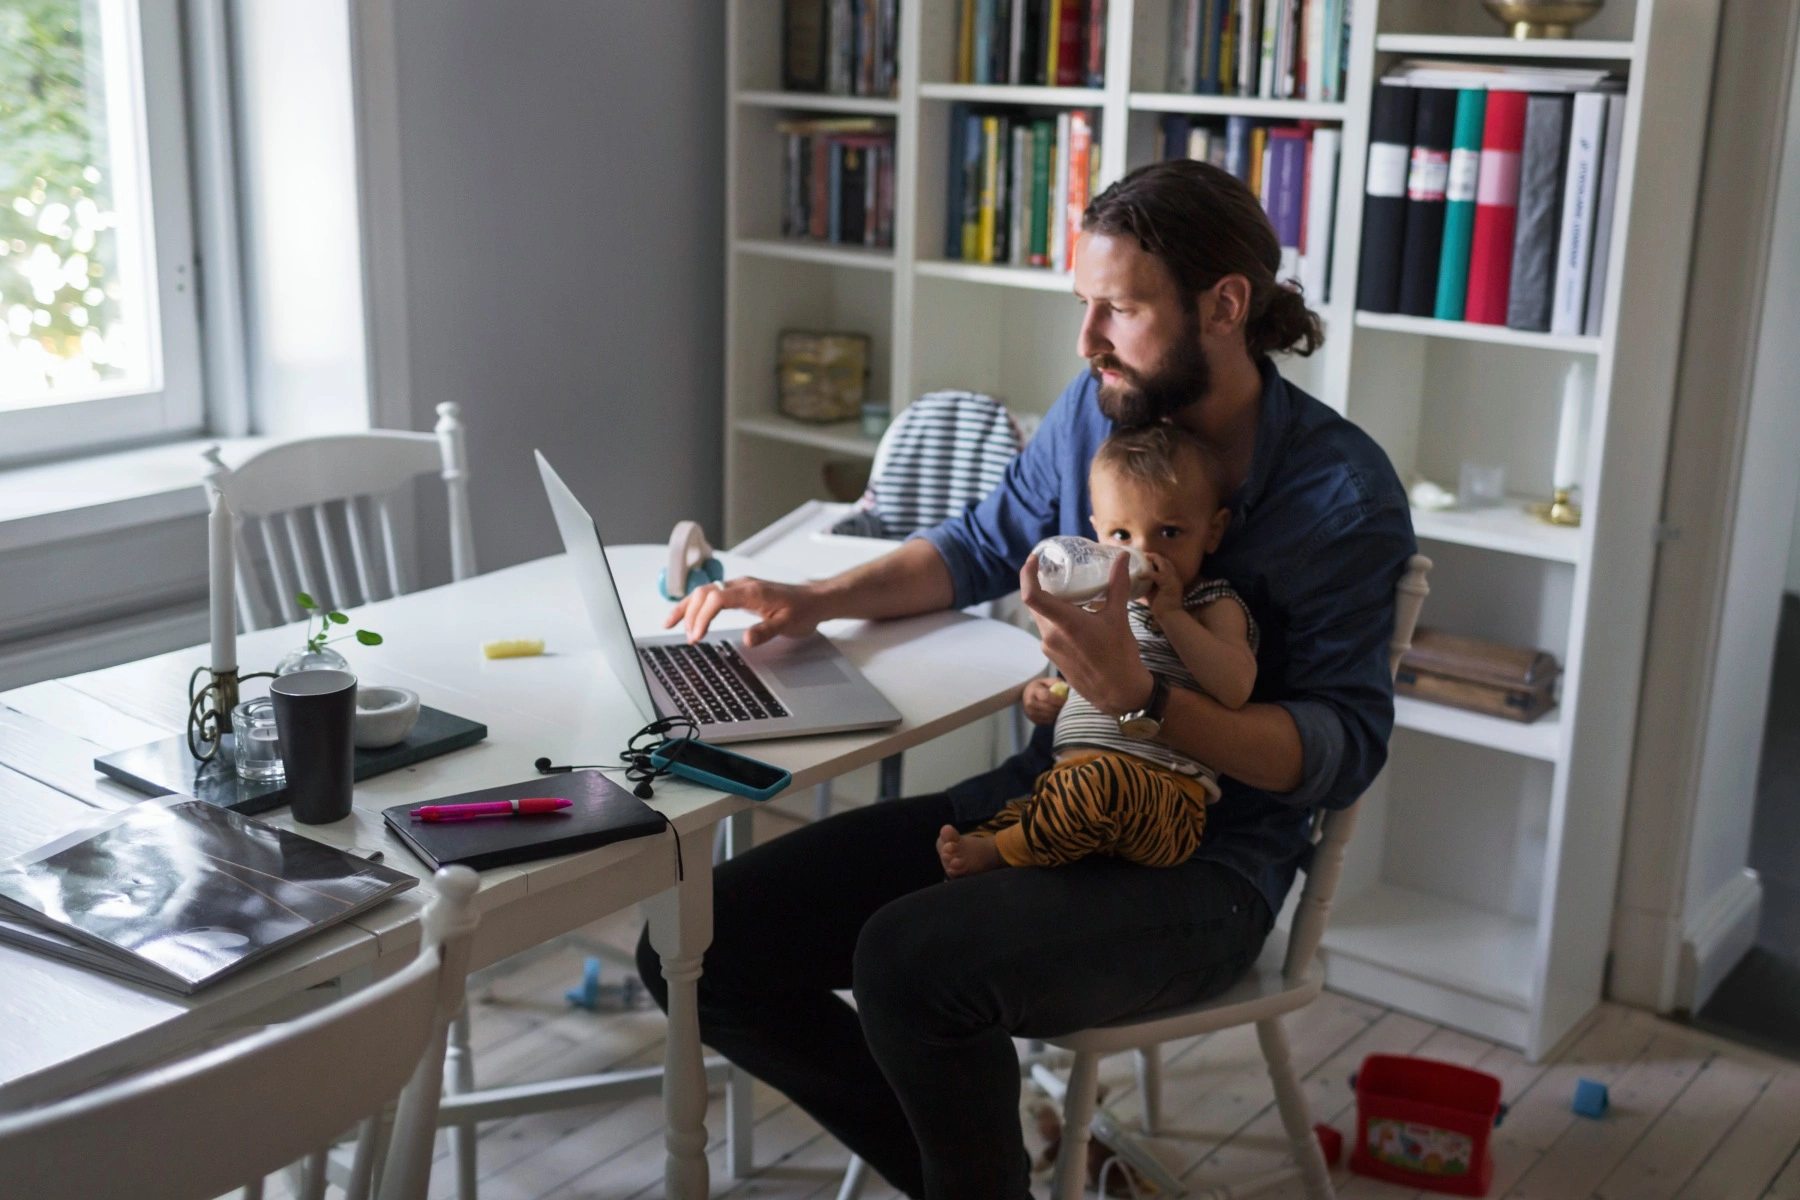 a father feeding his baby a bottle on his lap as he works on his laptop in his home office